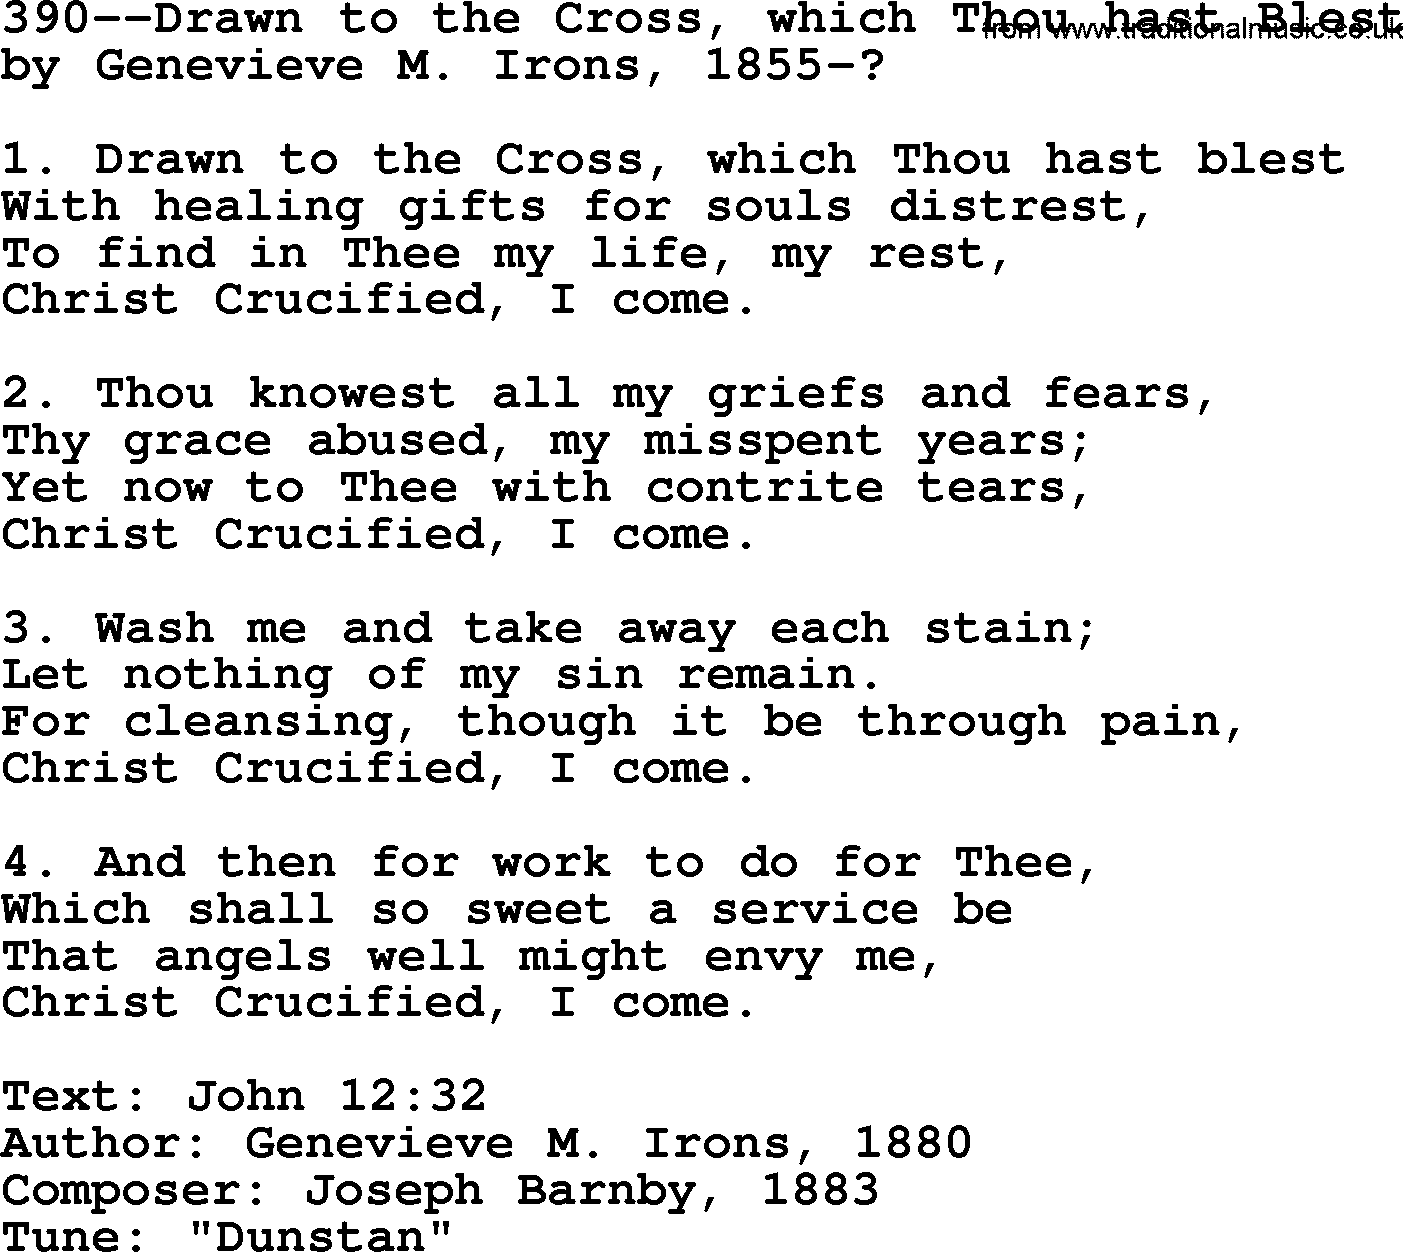 Lutheran Hymn: 390--Drawn to the Cross, which Thou hast Blest.txt lyrics with PDF